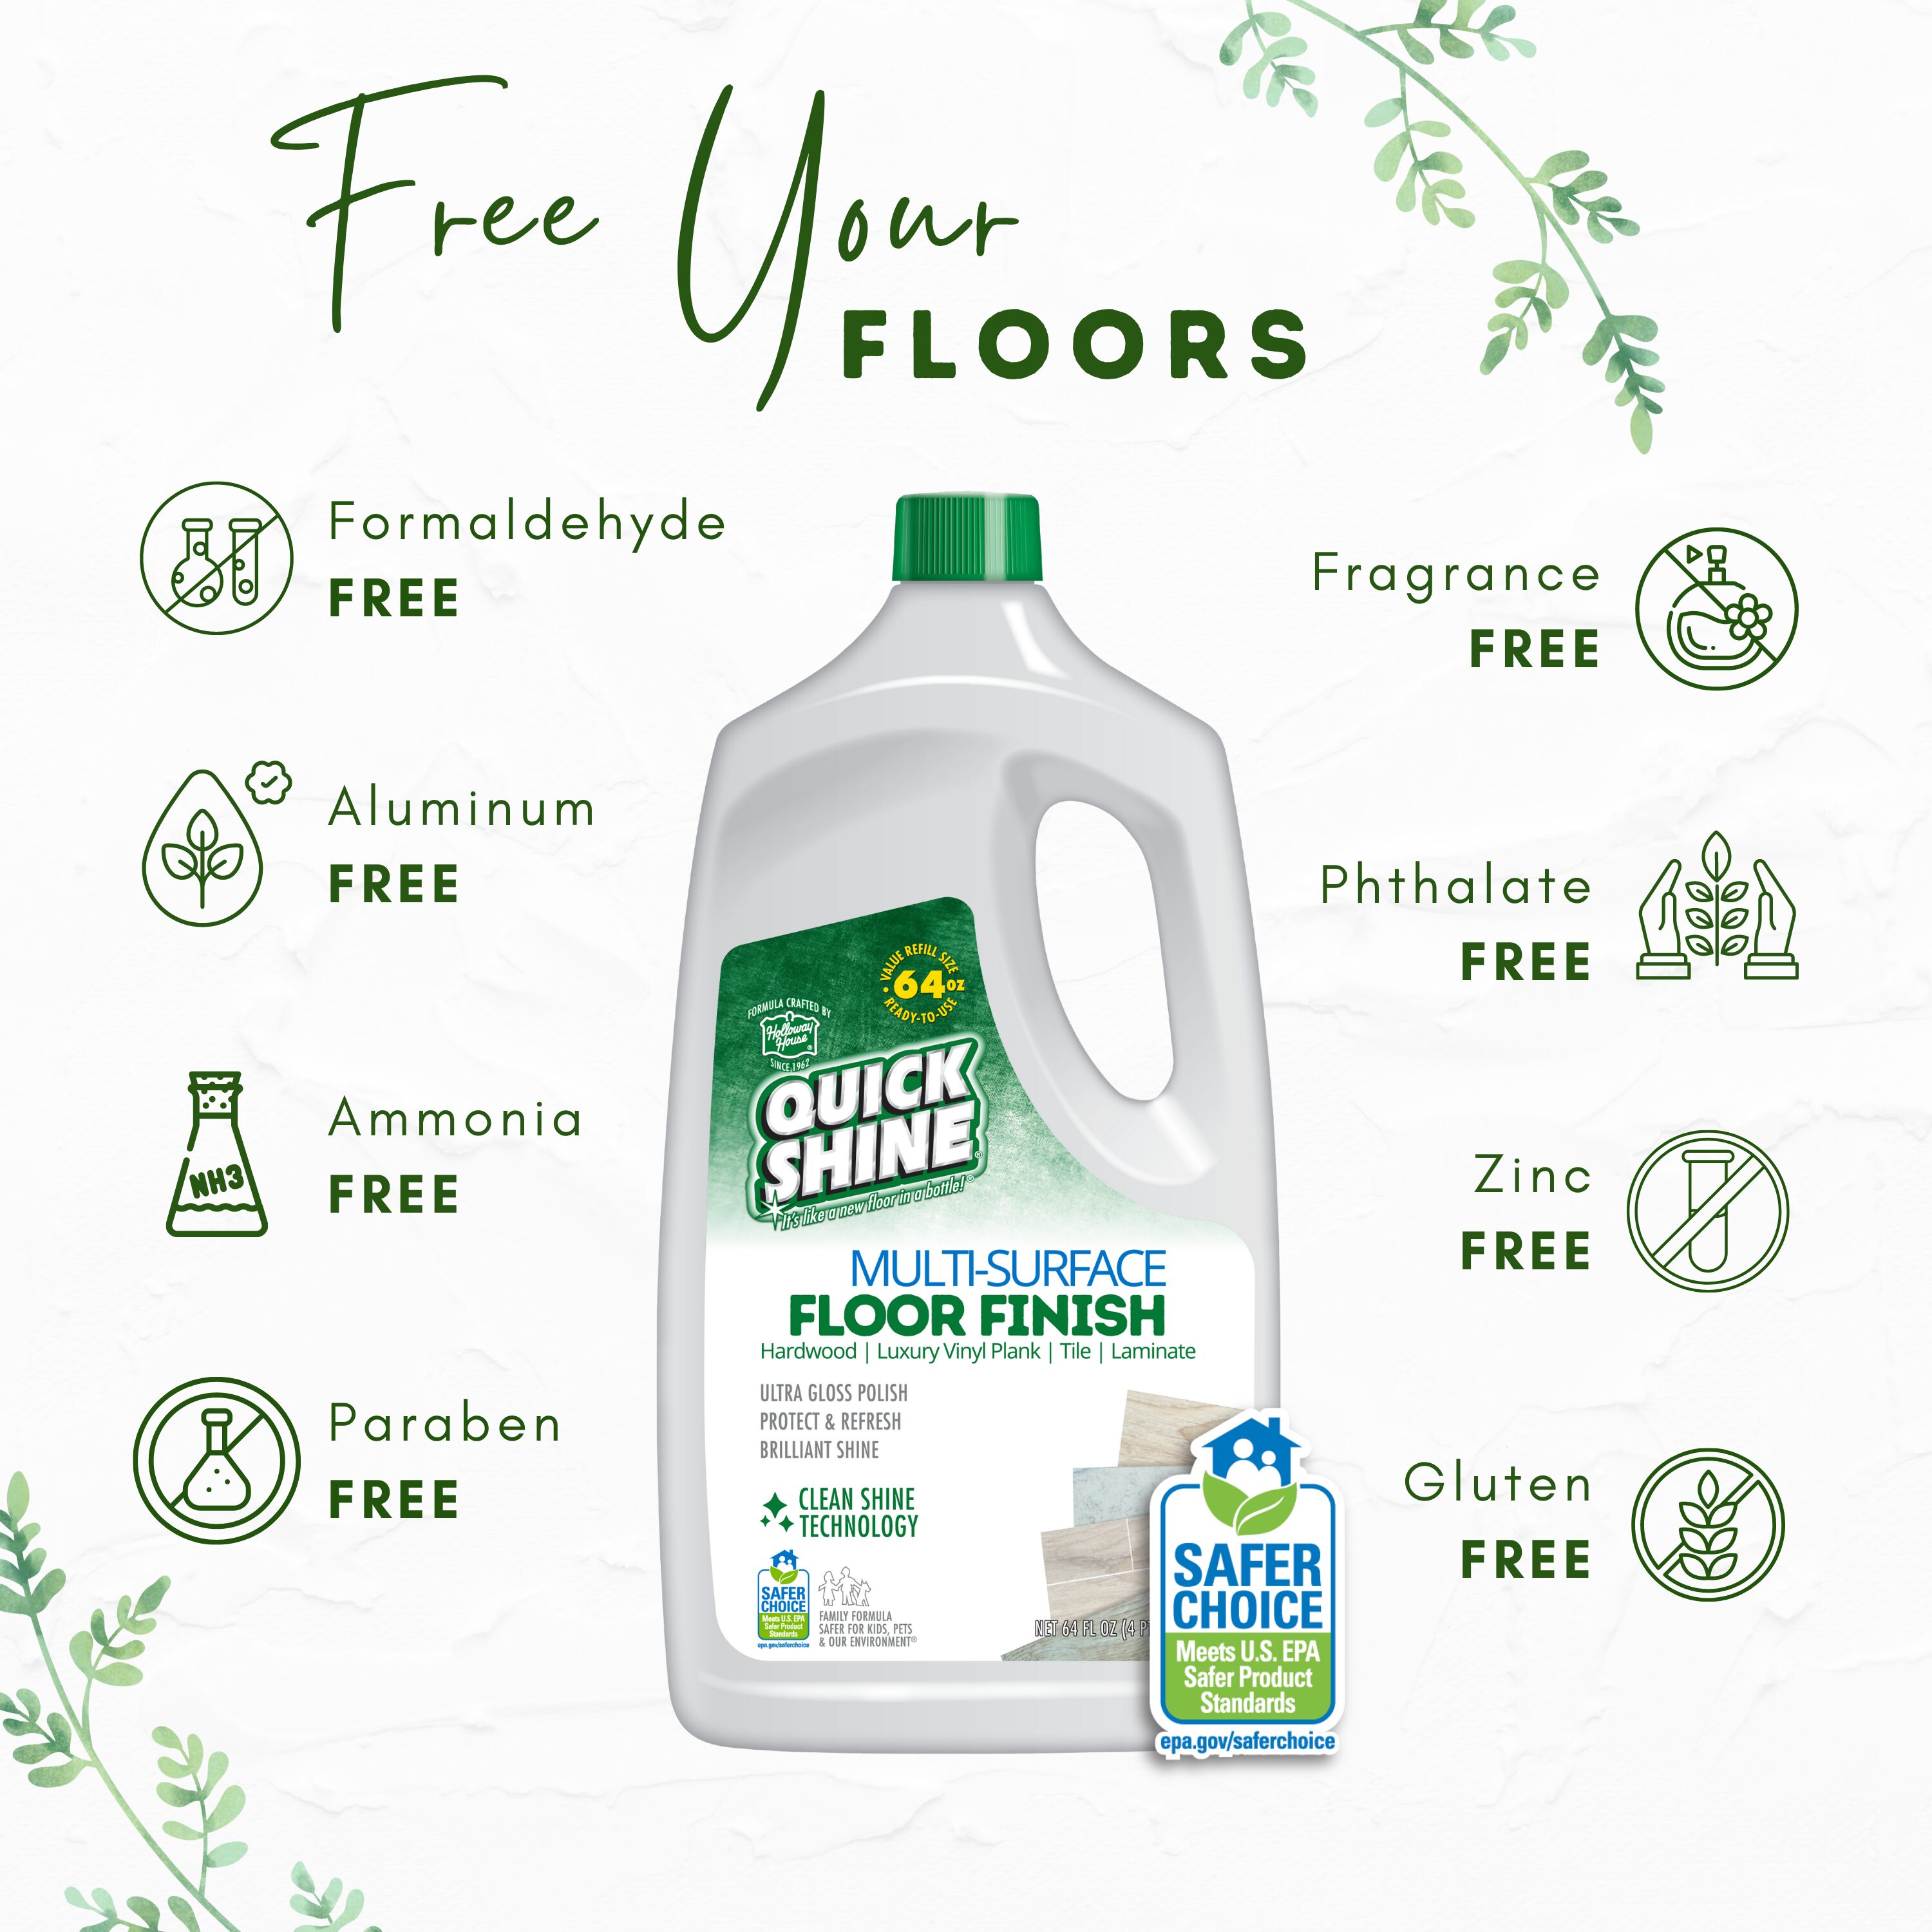 Quick Shine Floor Finish - 𝘽𝙚𝙛𝙤𝙧𝙚 𝙖𝙣𝙙 𝘼𝙛𝙩𝙚𝙧. The dull floor  you see has been buffed out and cleaned with the Holloway House Floor  Cleaner. Love the fragrance of the cleaner!!! The